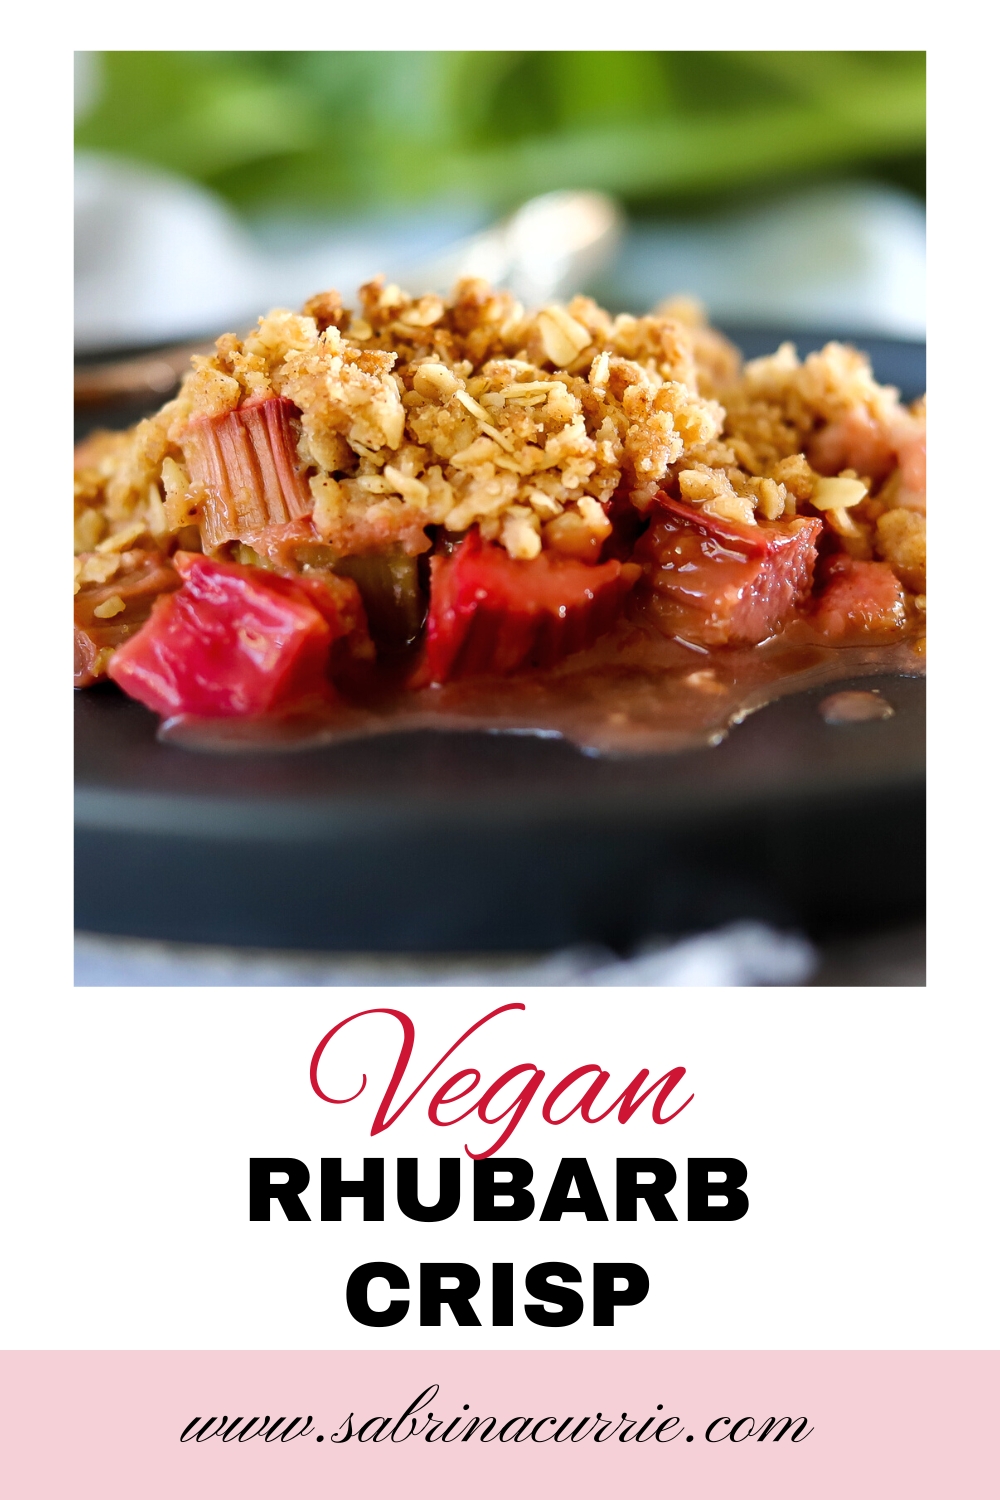 Pinterest graphic with photo of bright pink and golden brown vegan rhubarb crumble with green rhubarb leaf in the background.